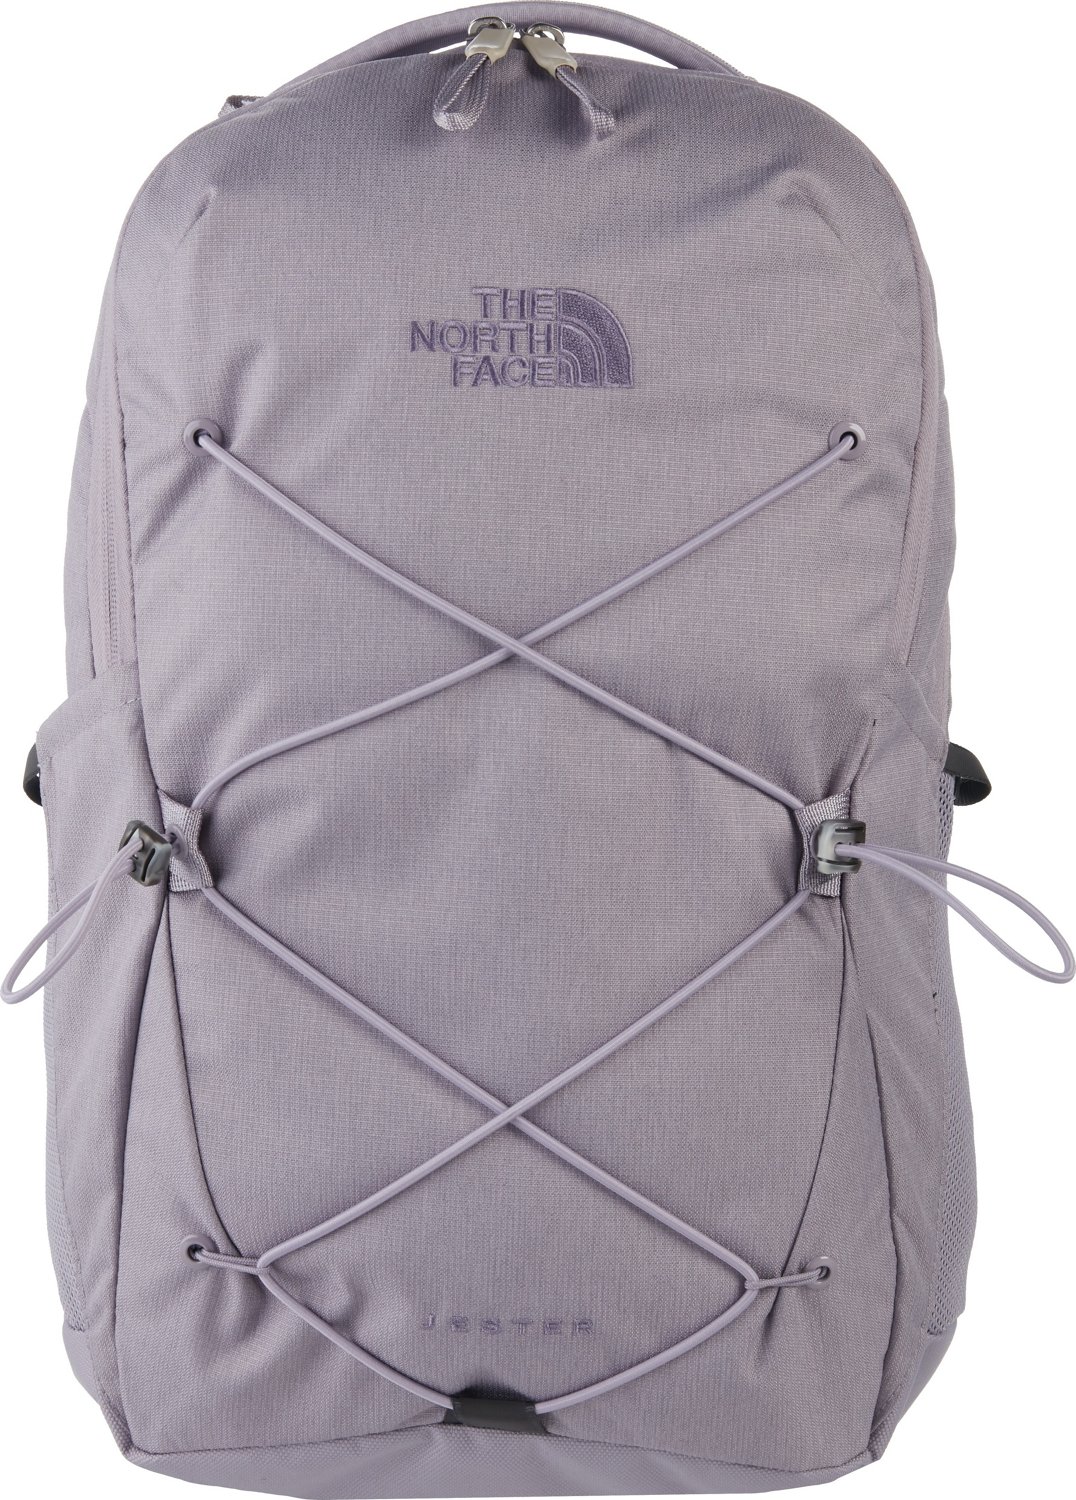 The North Face Womenâs Jester Backpack | Academy